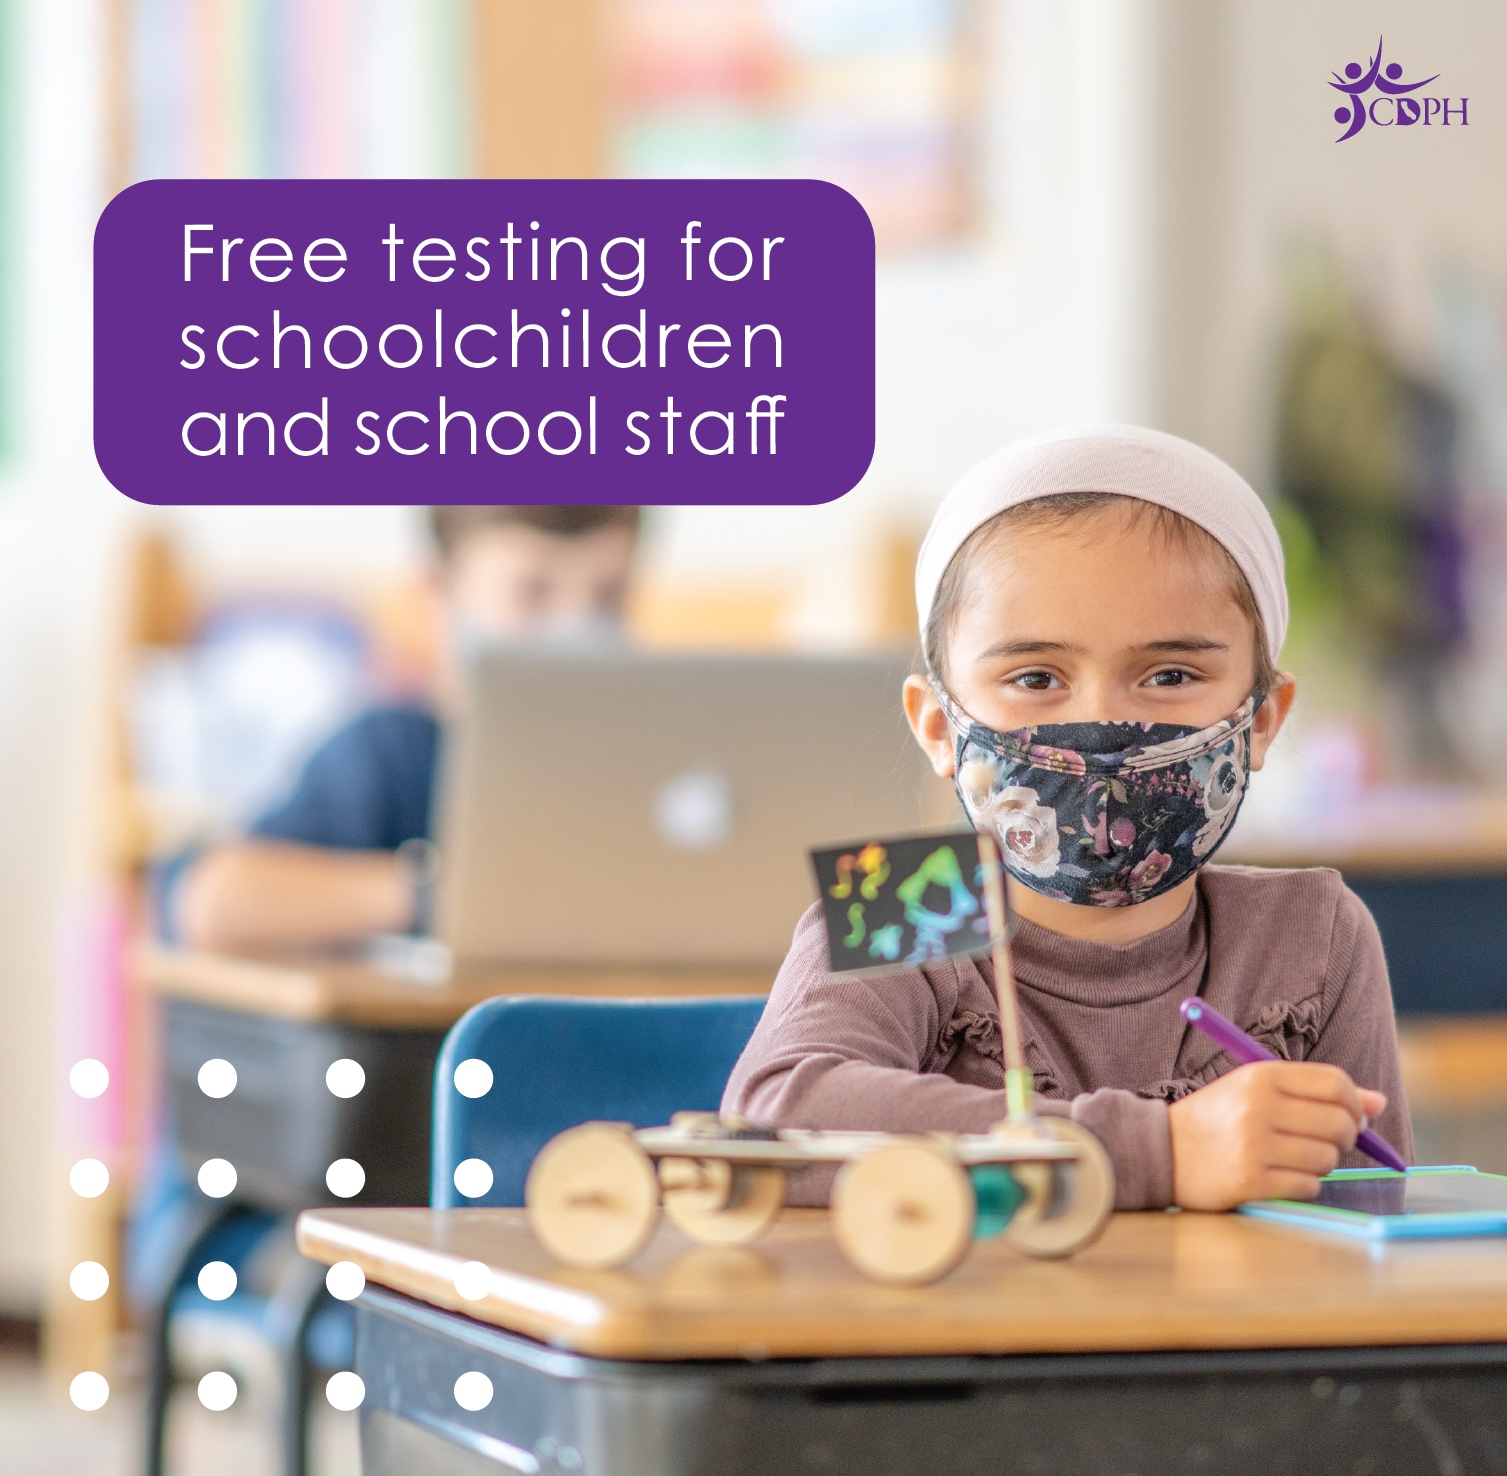 Student with mask in classroom with text overlay "Free testing for schoolchildren and school staff"